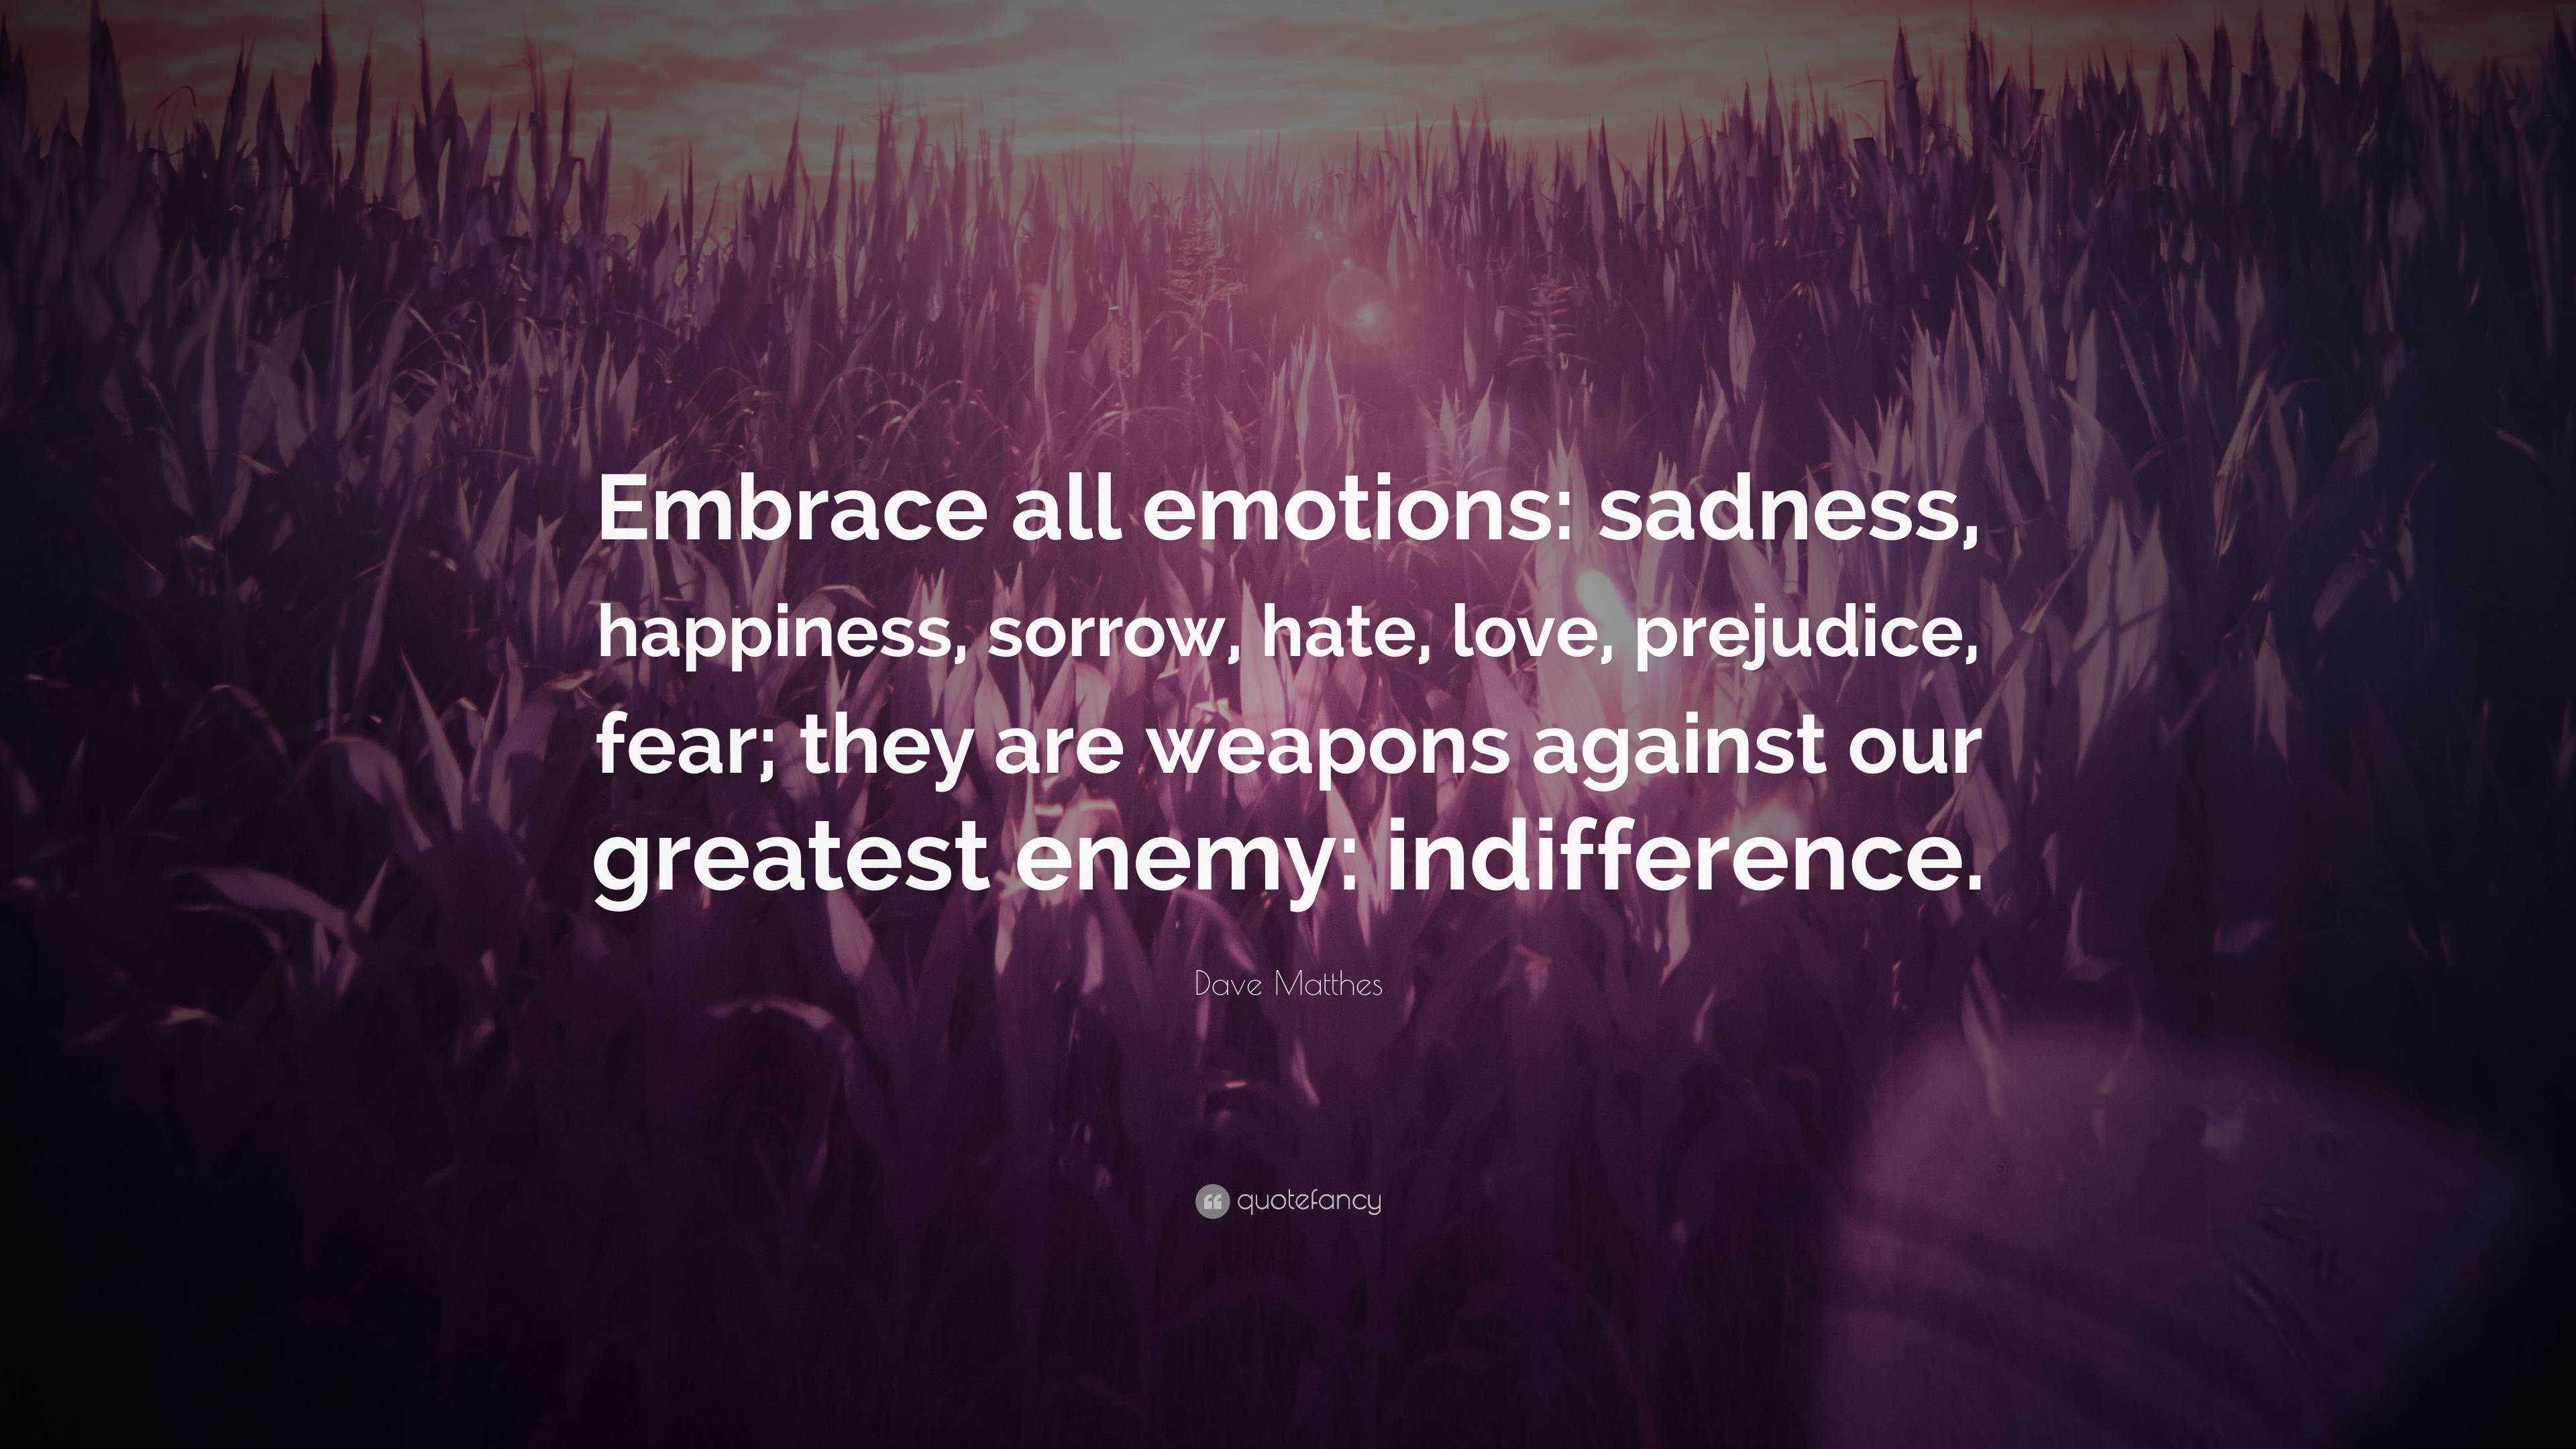 Dave Matthes Quote: “Embrace all emotions: sadness, happiness, sorrow,  hate, love, prejudice, fear; they are weapons against our greatest ene”